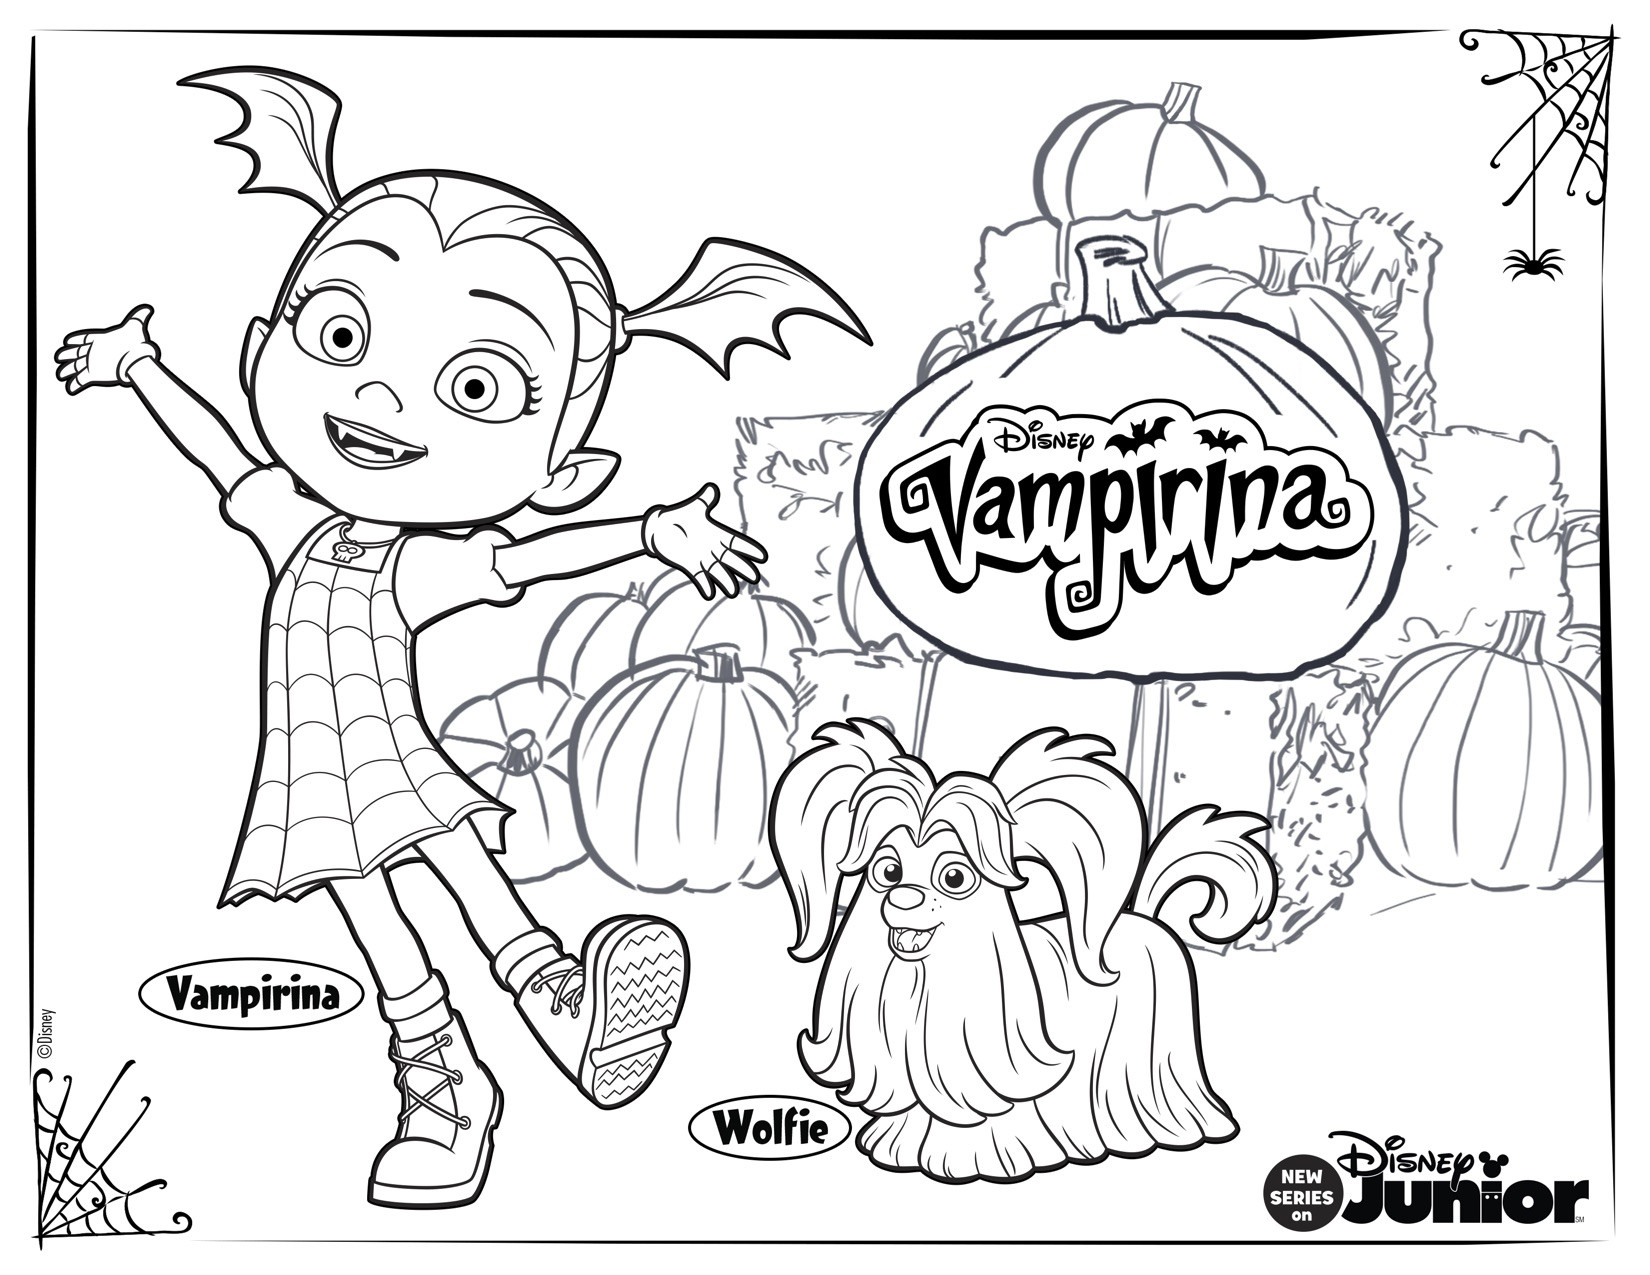 Vampirina Coloring Pages Printable
 Vampirina Coloring Pages for Your Little e